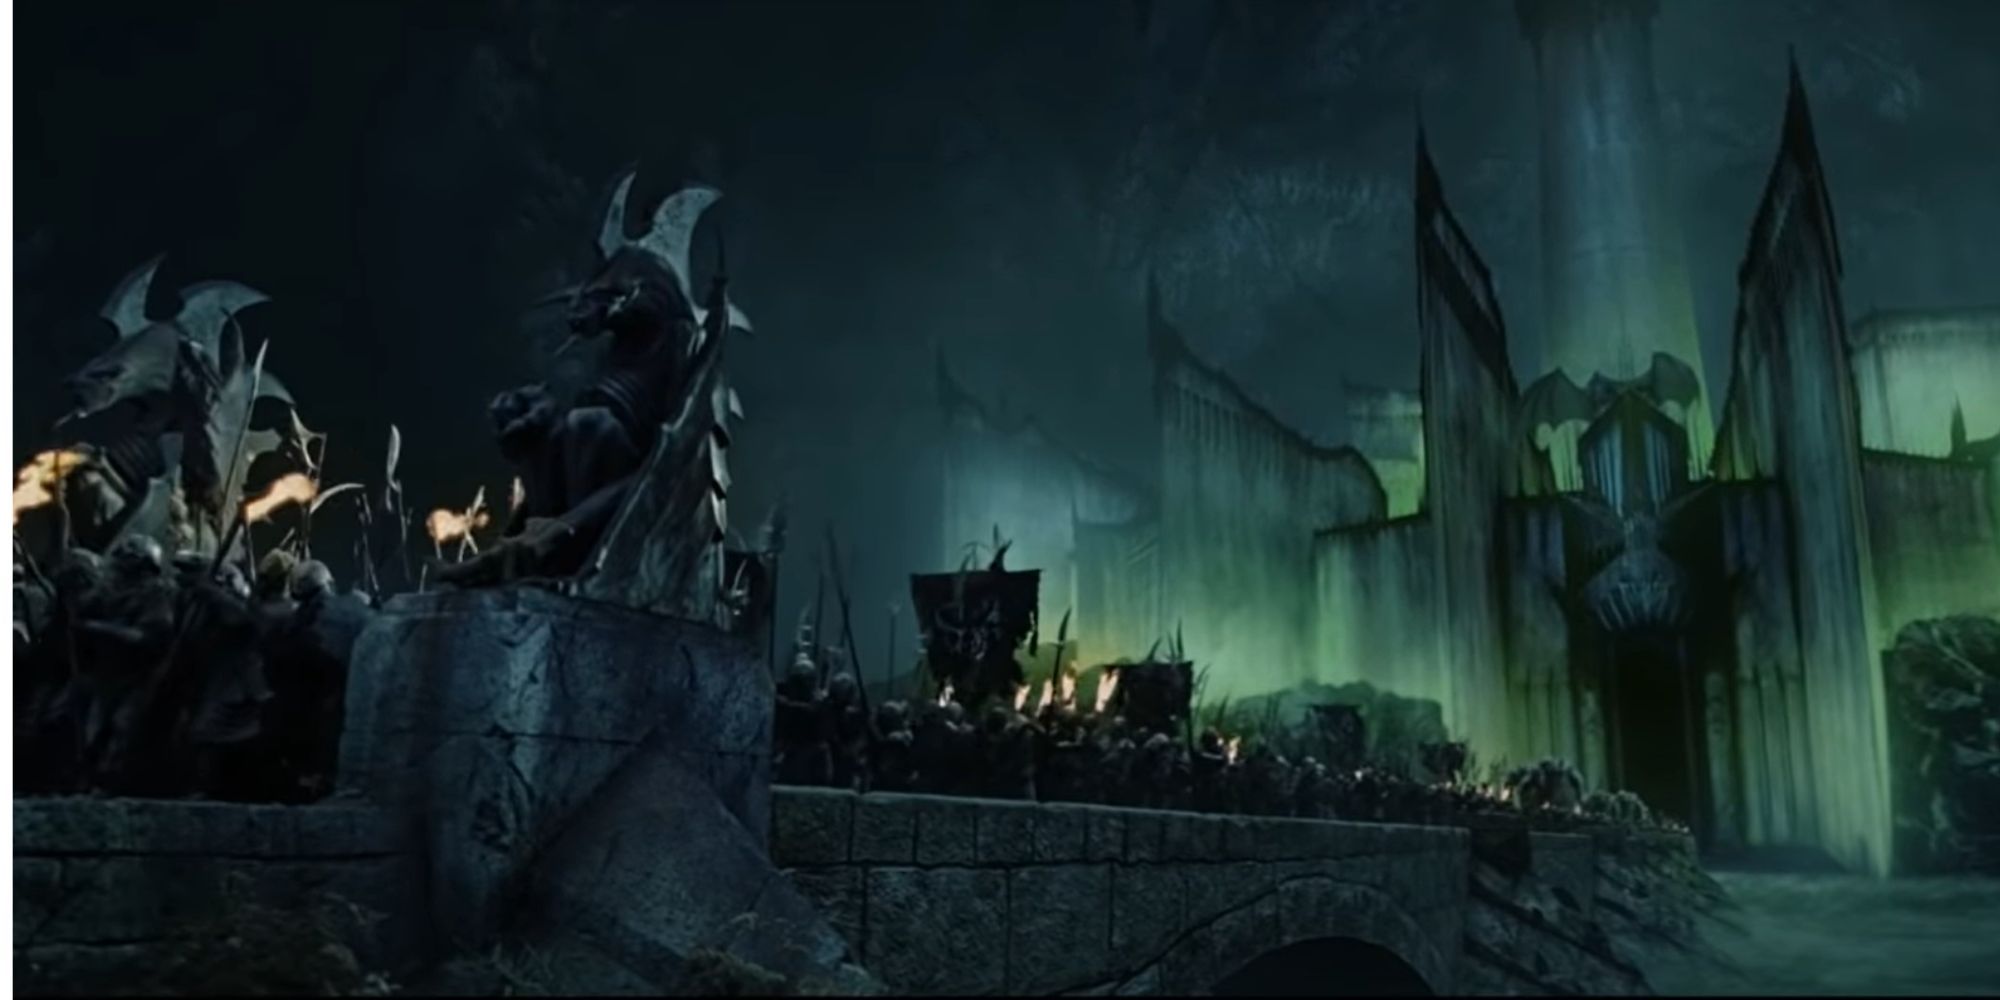 An army of orcs mobilizes from Minas Morgul, which sits in the background, a Nazgul perched atop. 